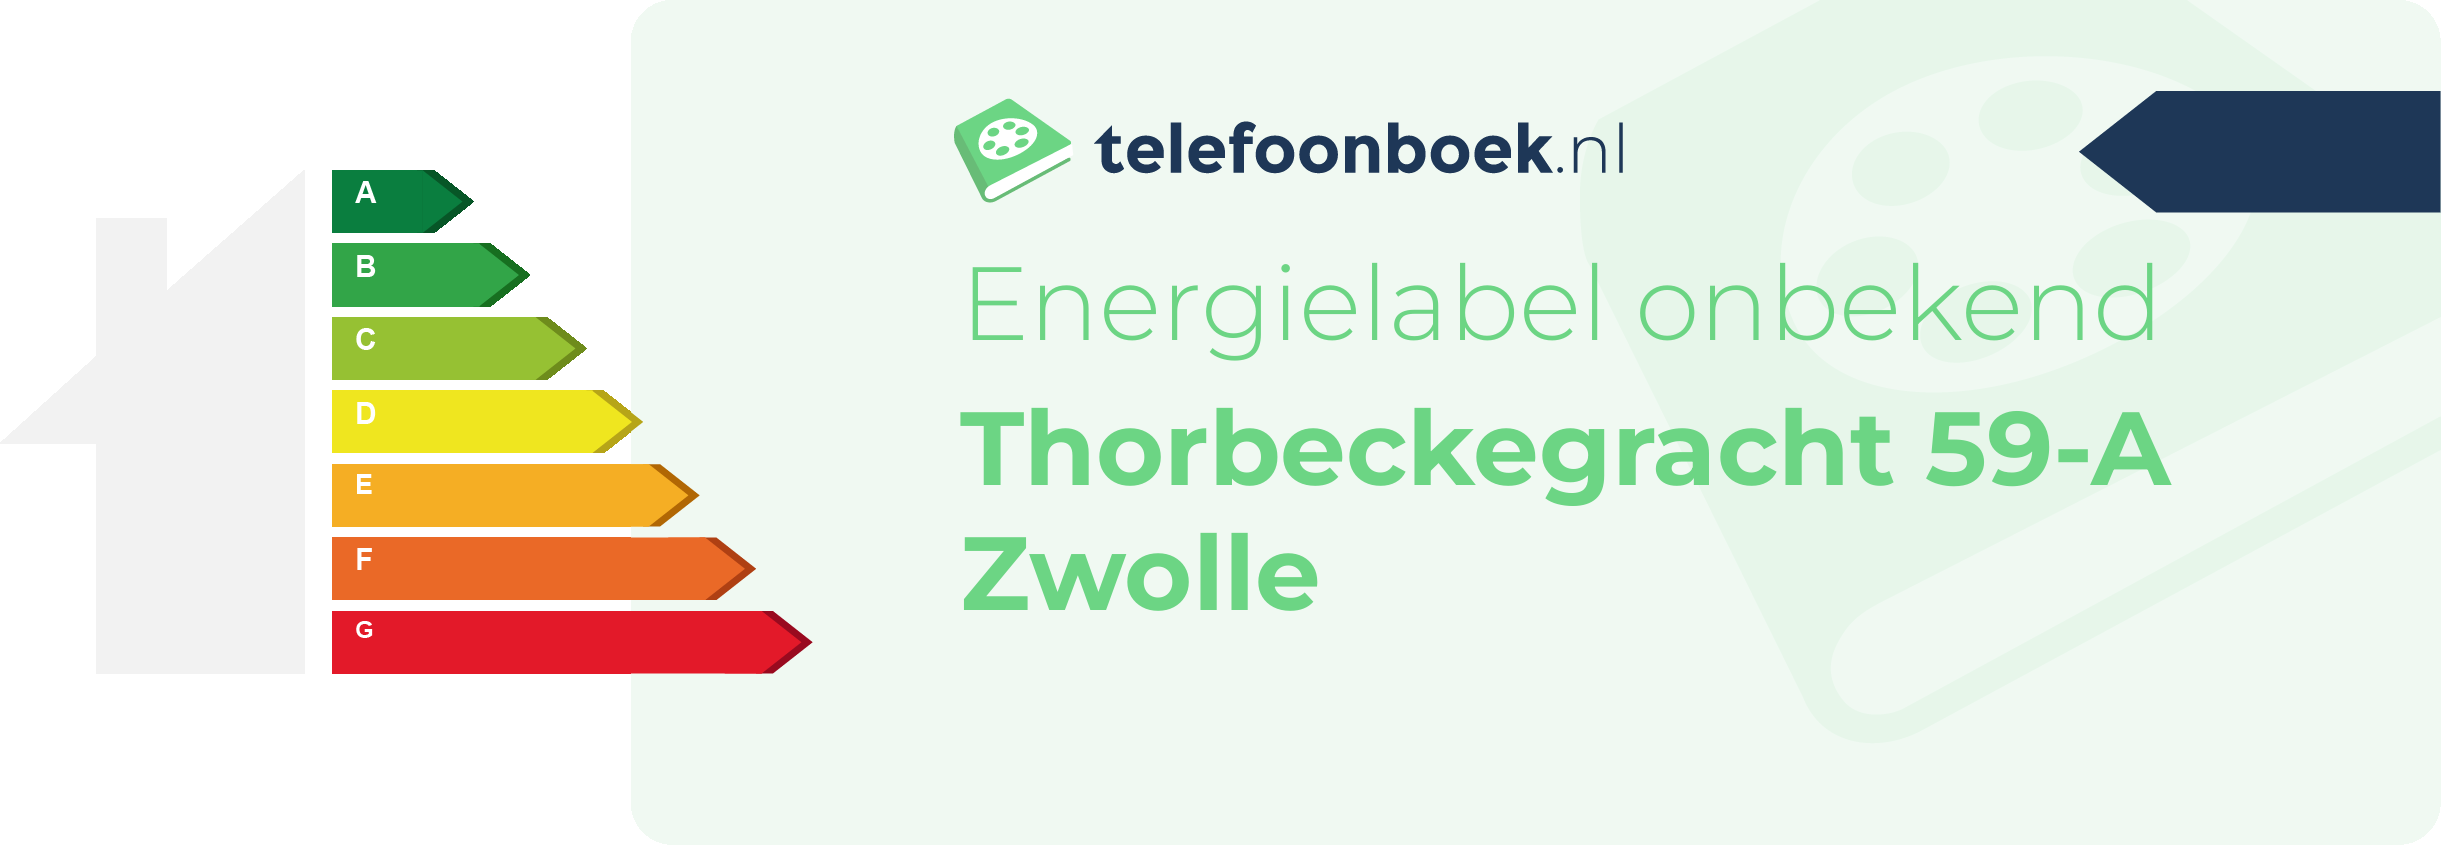 Energielabel Thorbeckegracht 59-A Zwolle